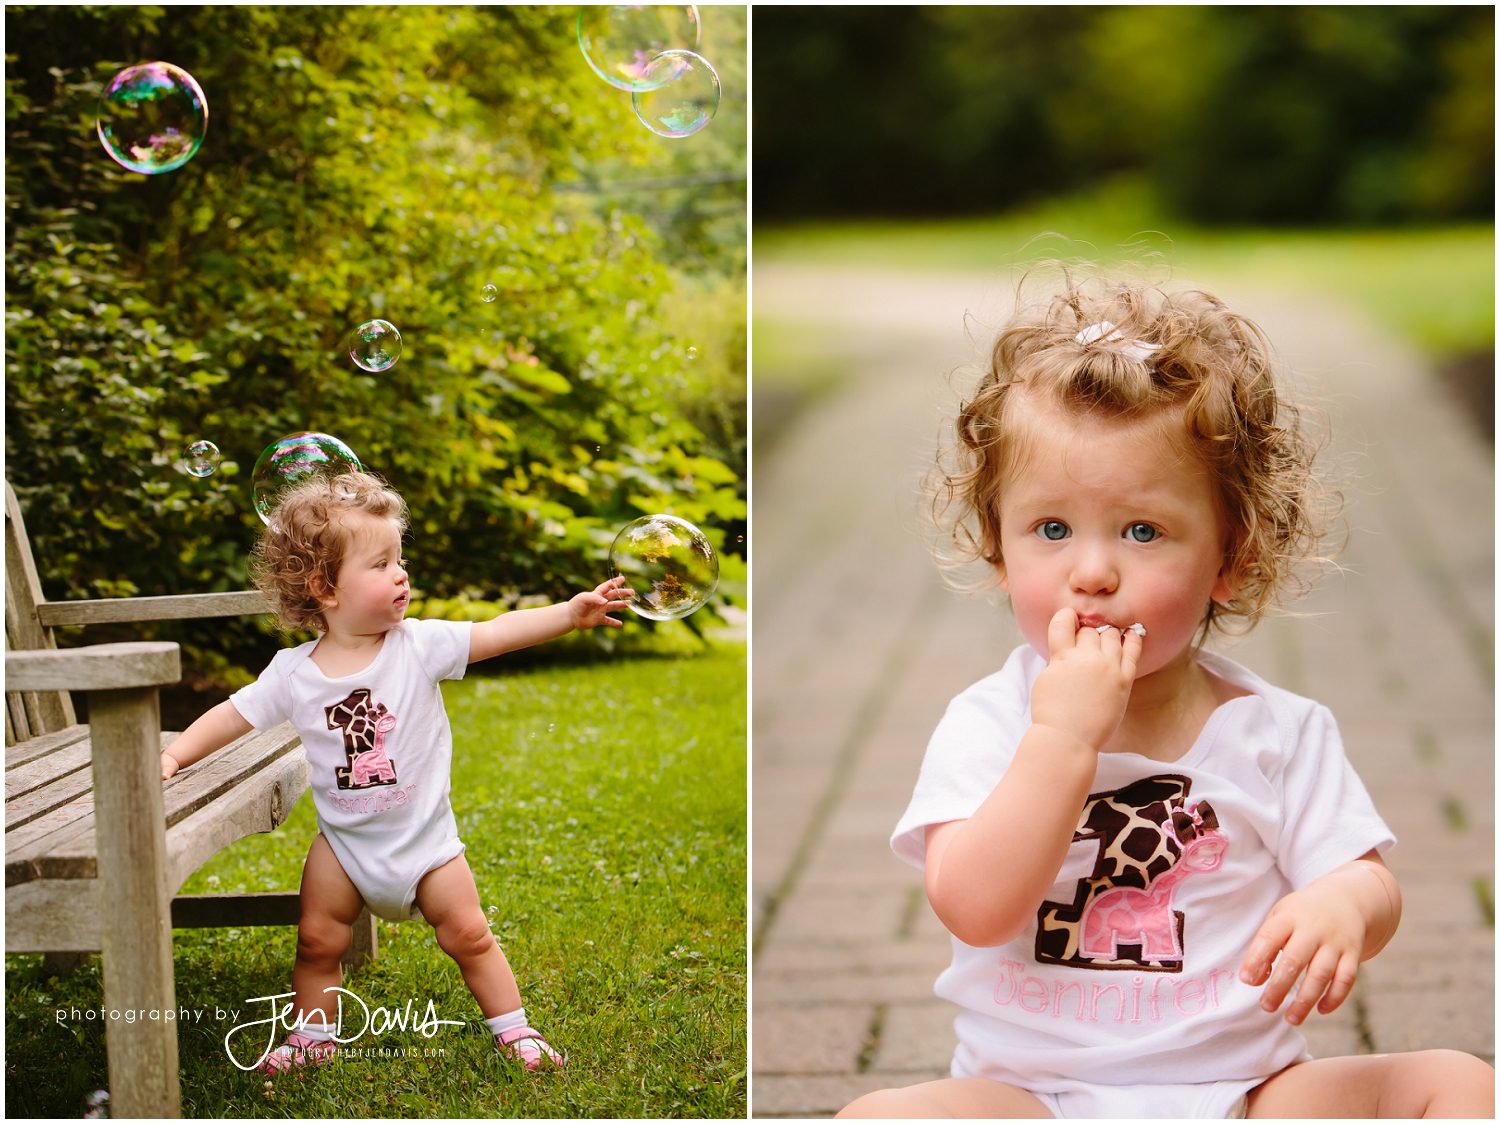 1 year old birthday pictures in the garden